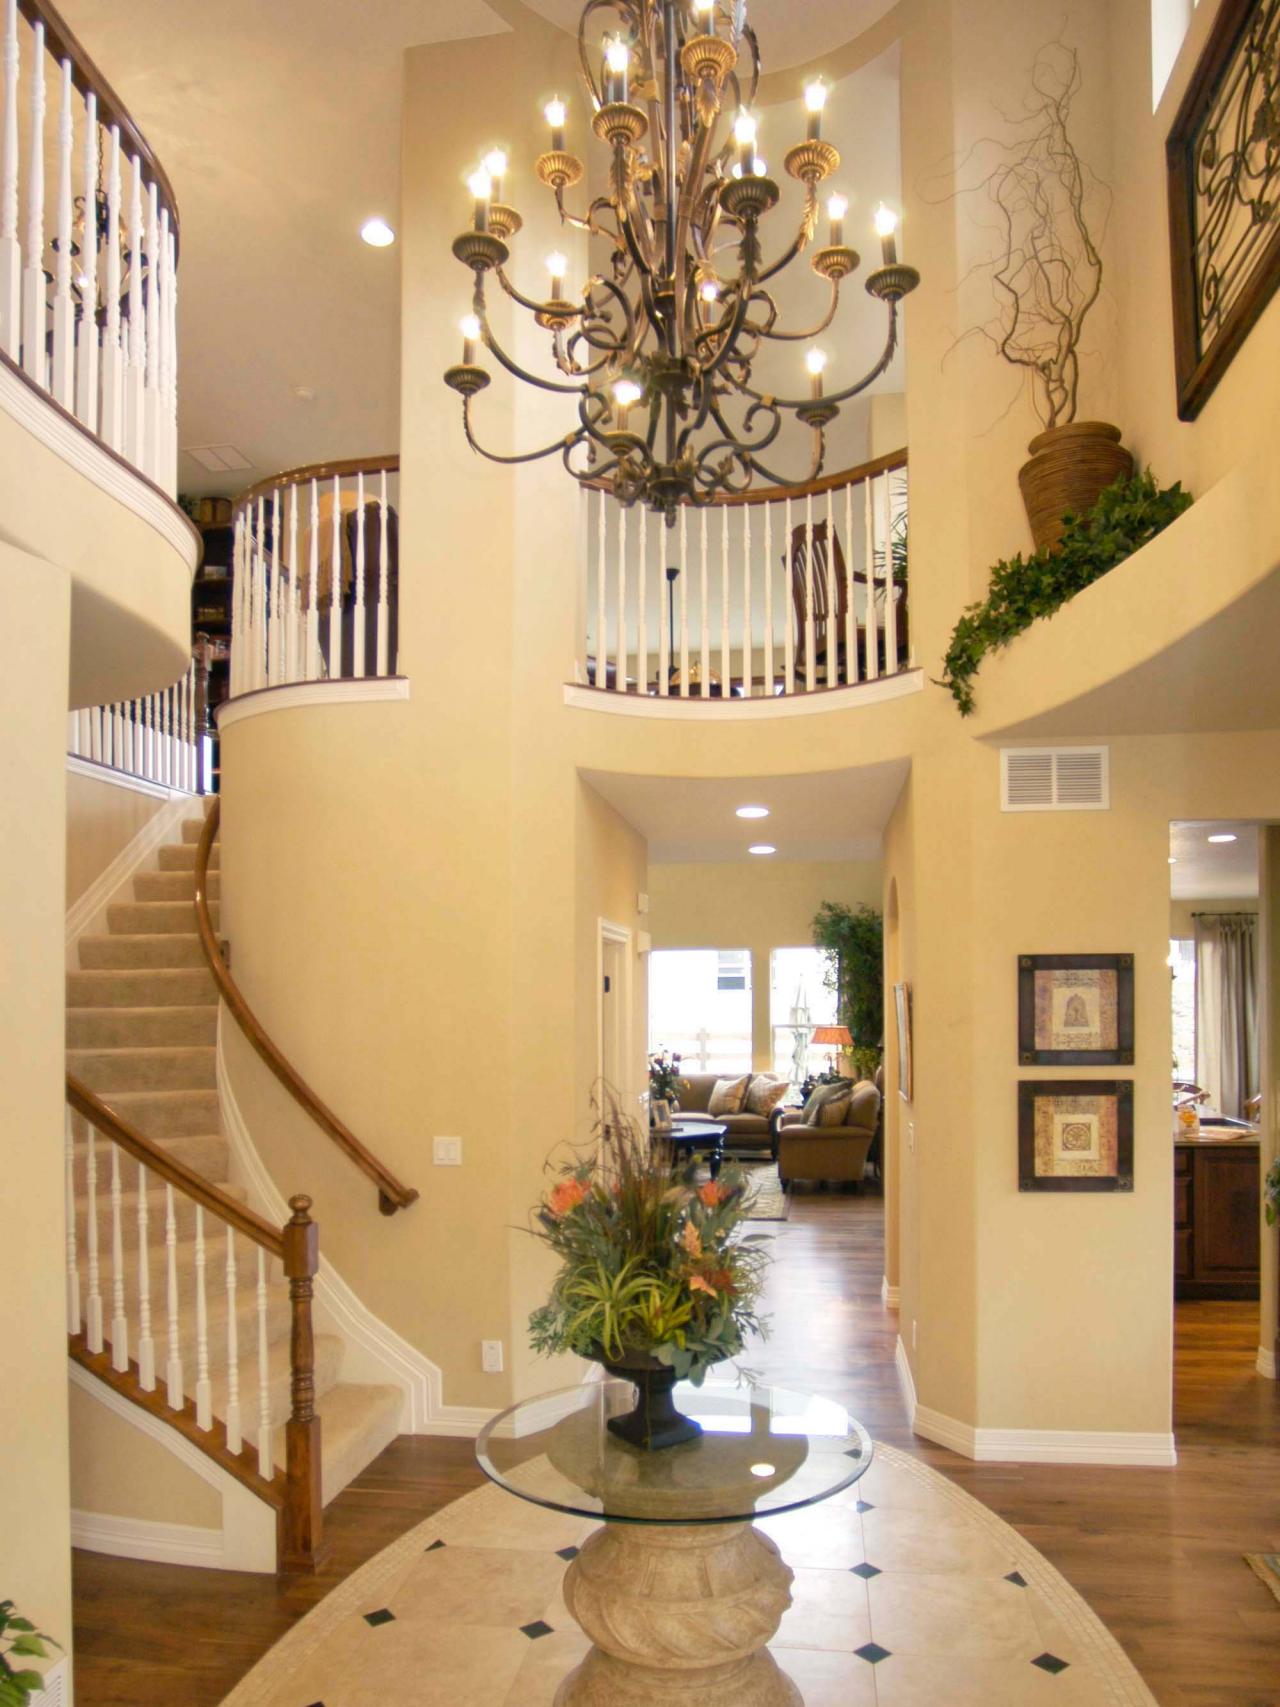 Entryway Lighting Designs | Home Remodeling - Ideas for Basements, Home